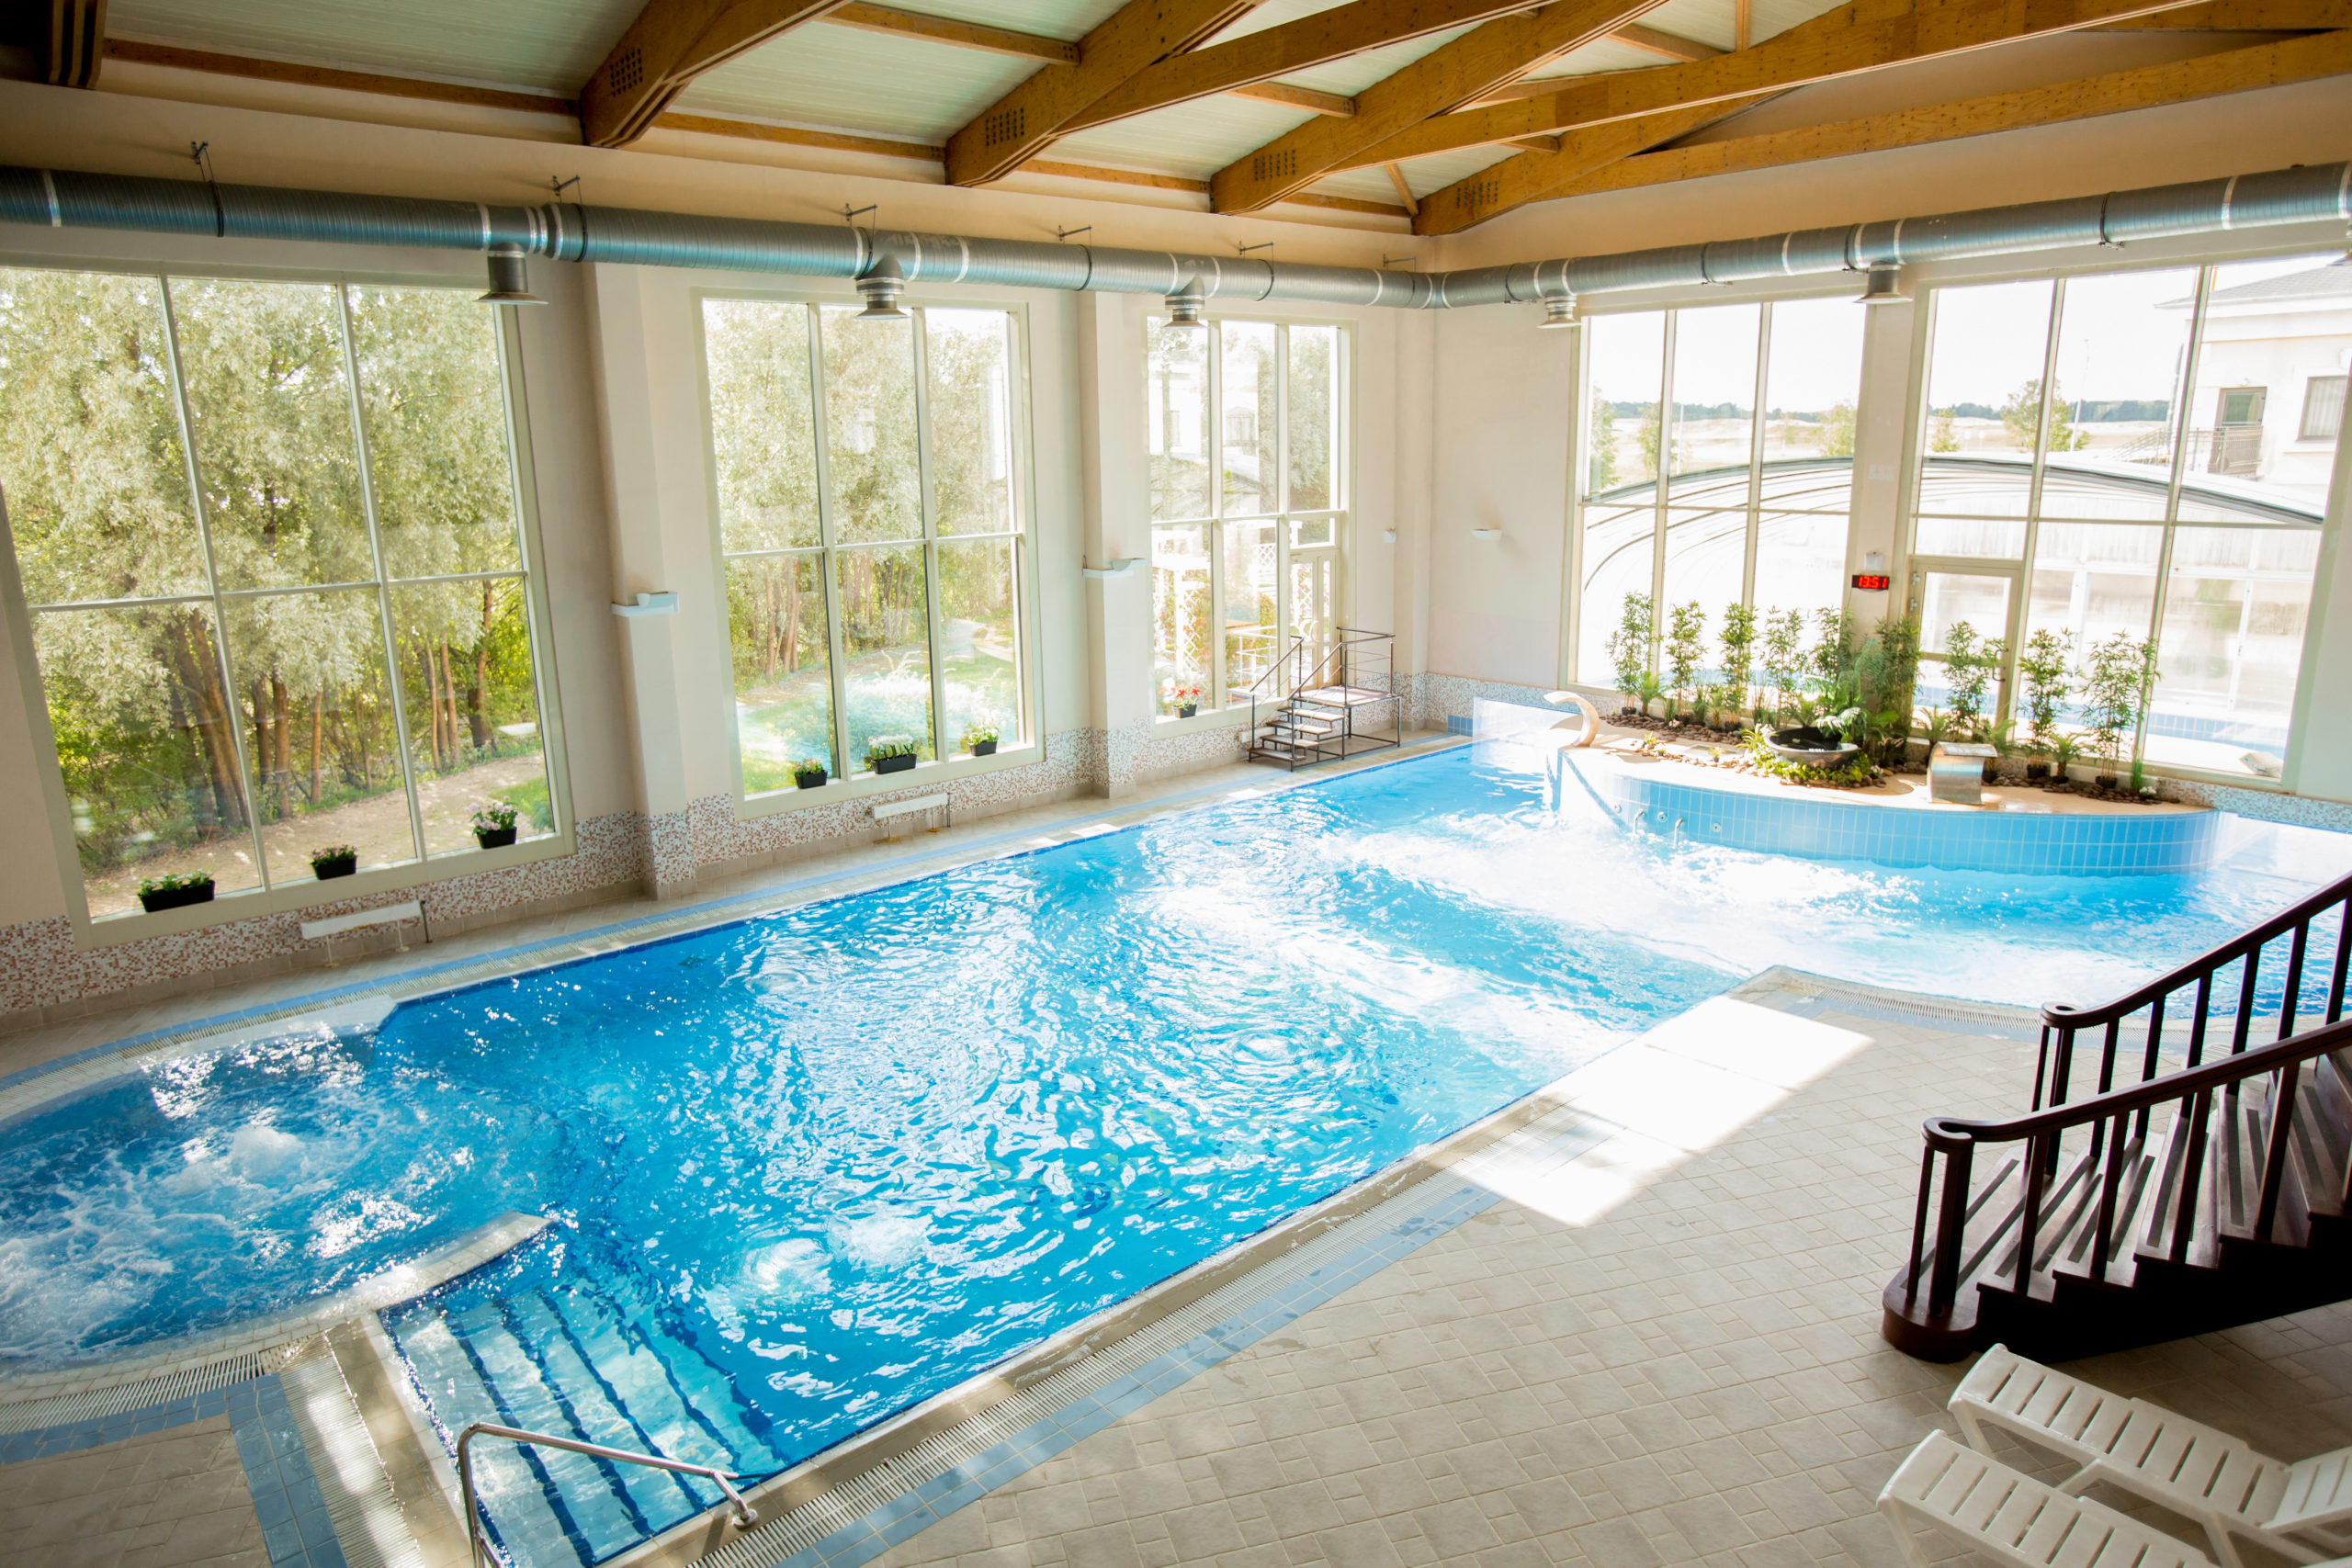 Spacious room with swimming-pool in its center at spa resort or hotel